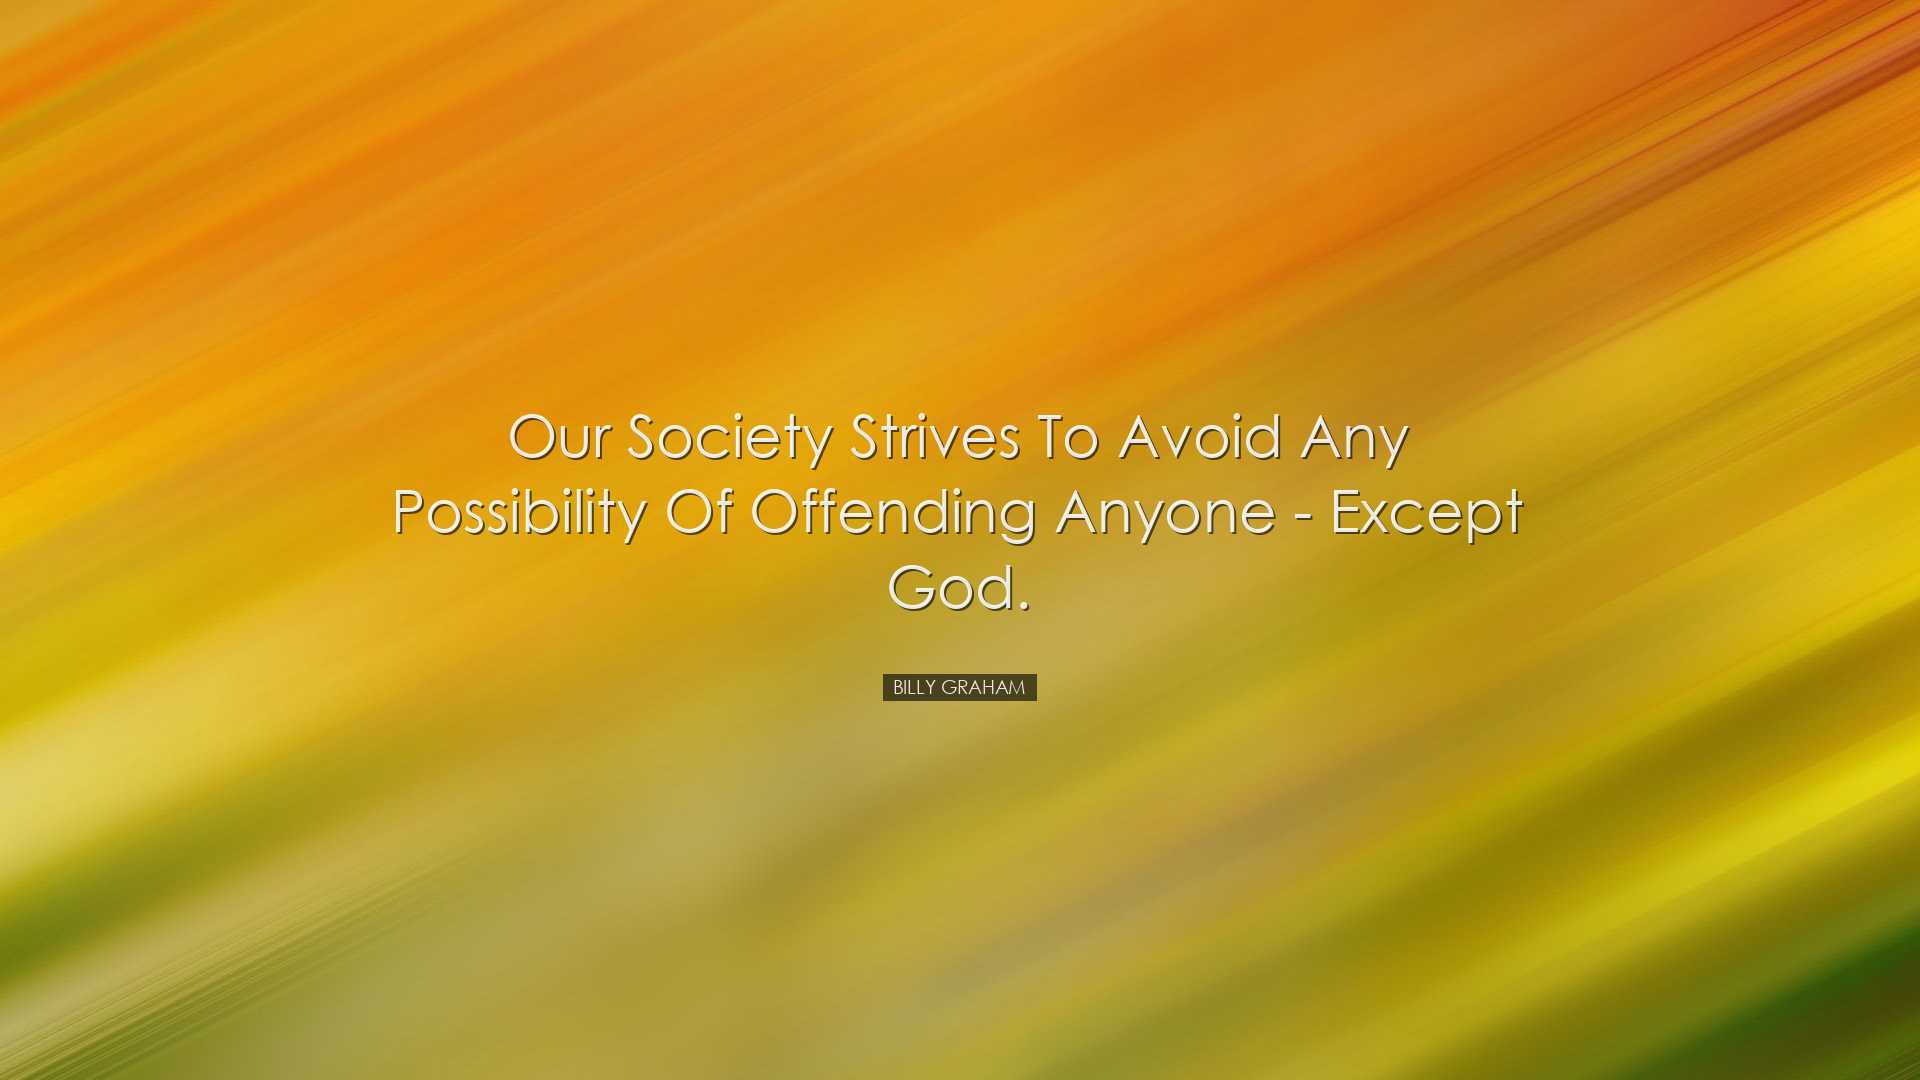 Our society strives to avoid any possibility of offending anyone -